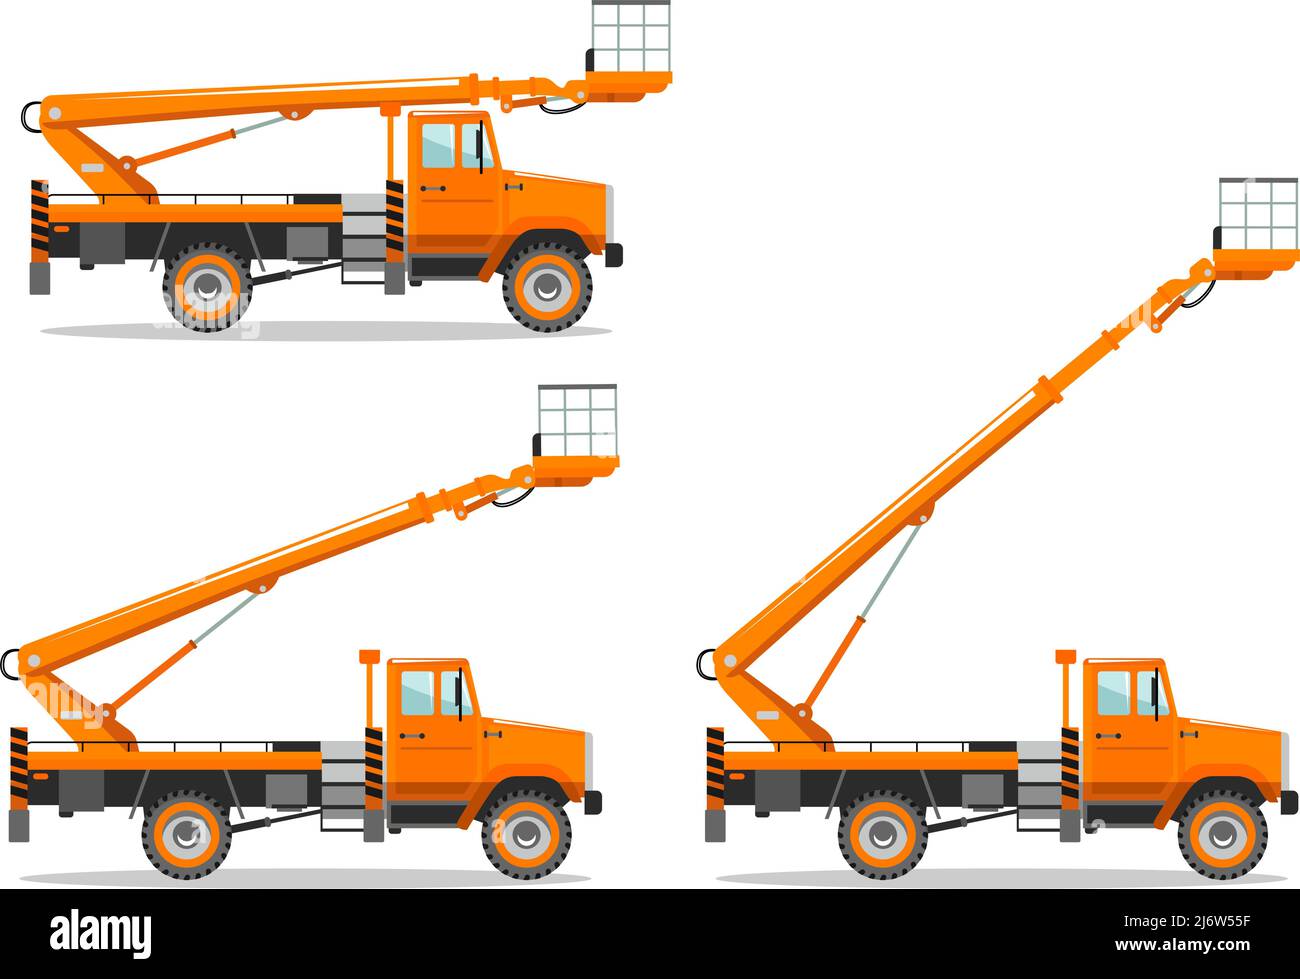 Detailed illustration of aerial platform truck with different boom position. Heavy construction machine. Heavy equipment and machinery. Stock Vector